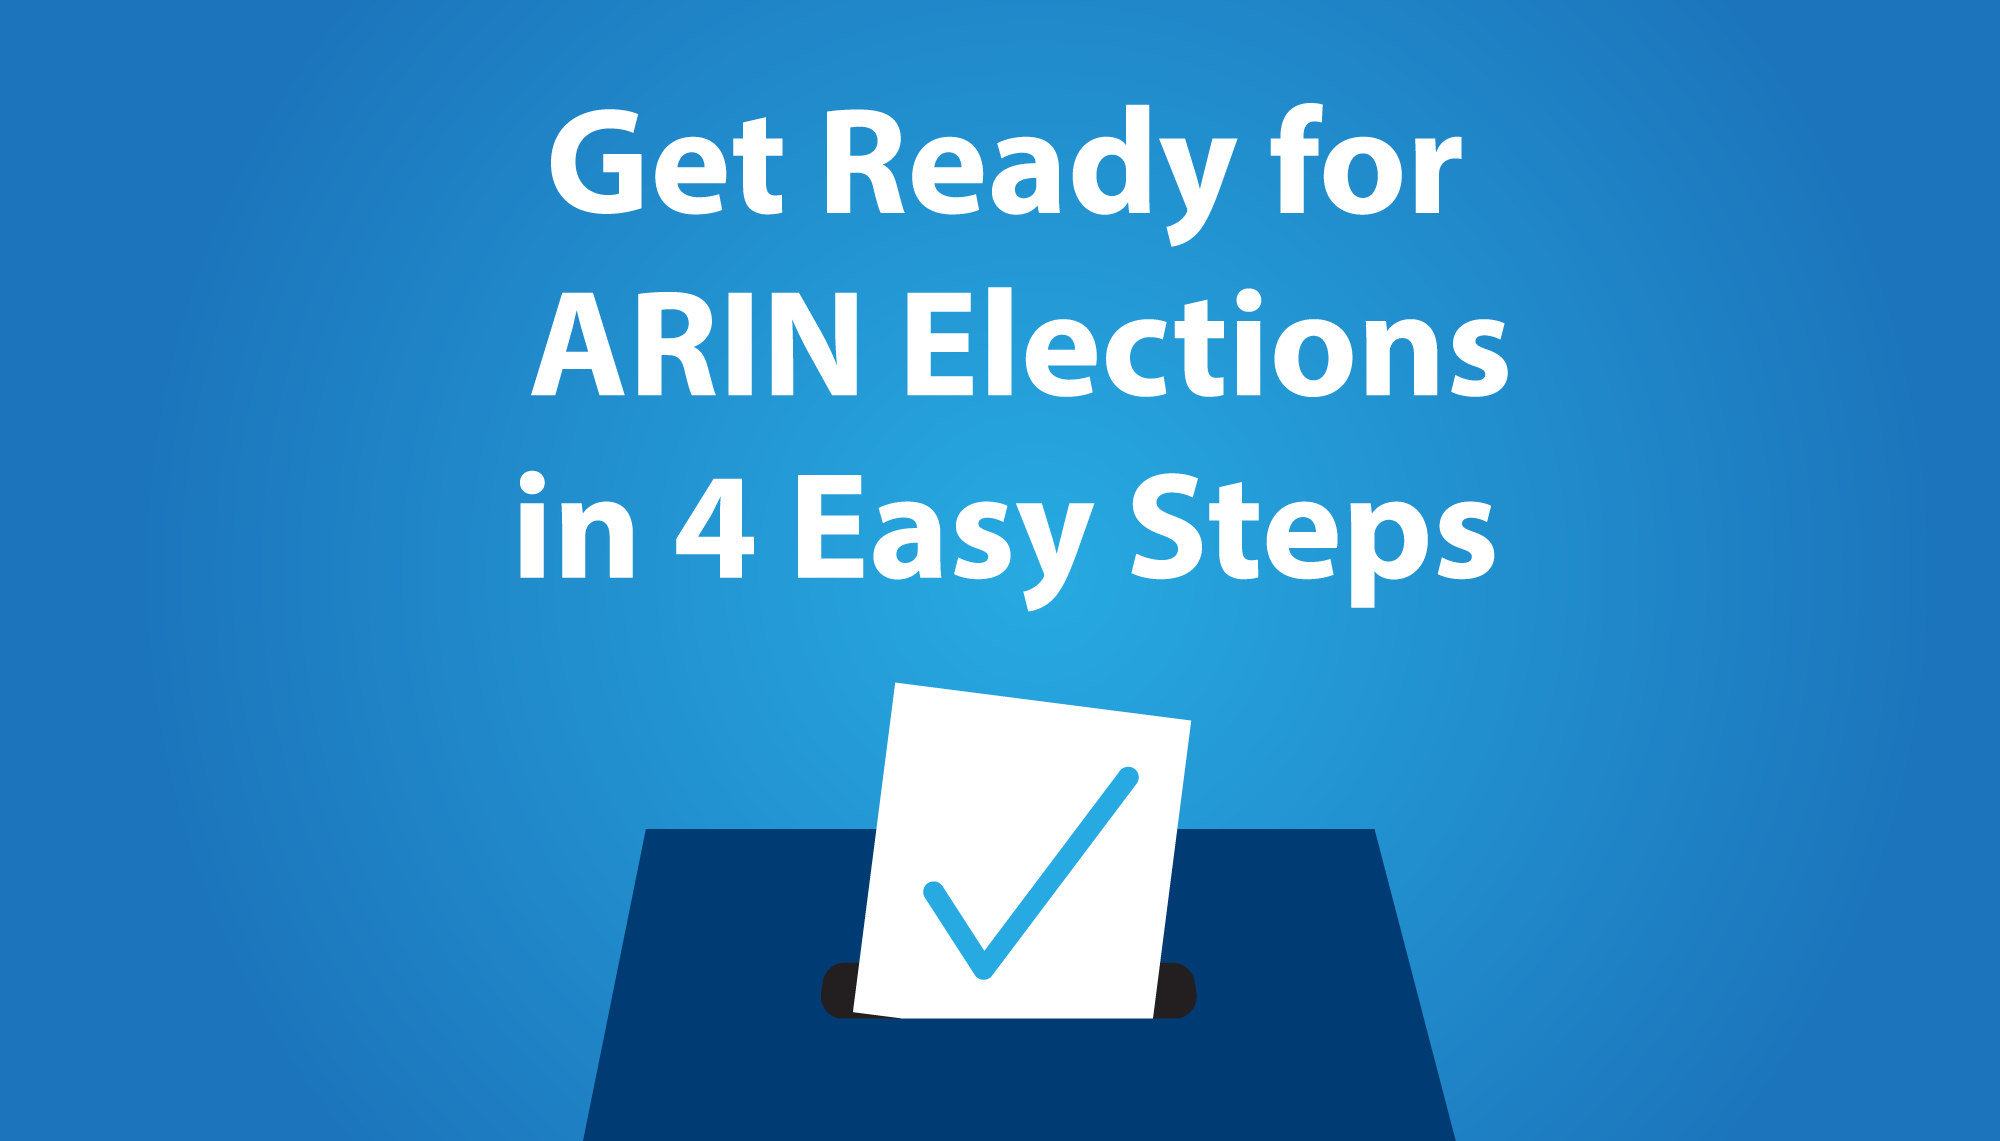 Get Ready for ARIN Elections in 4 Easy Steps